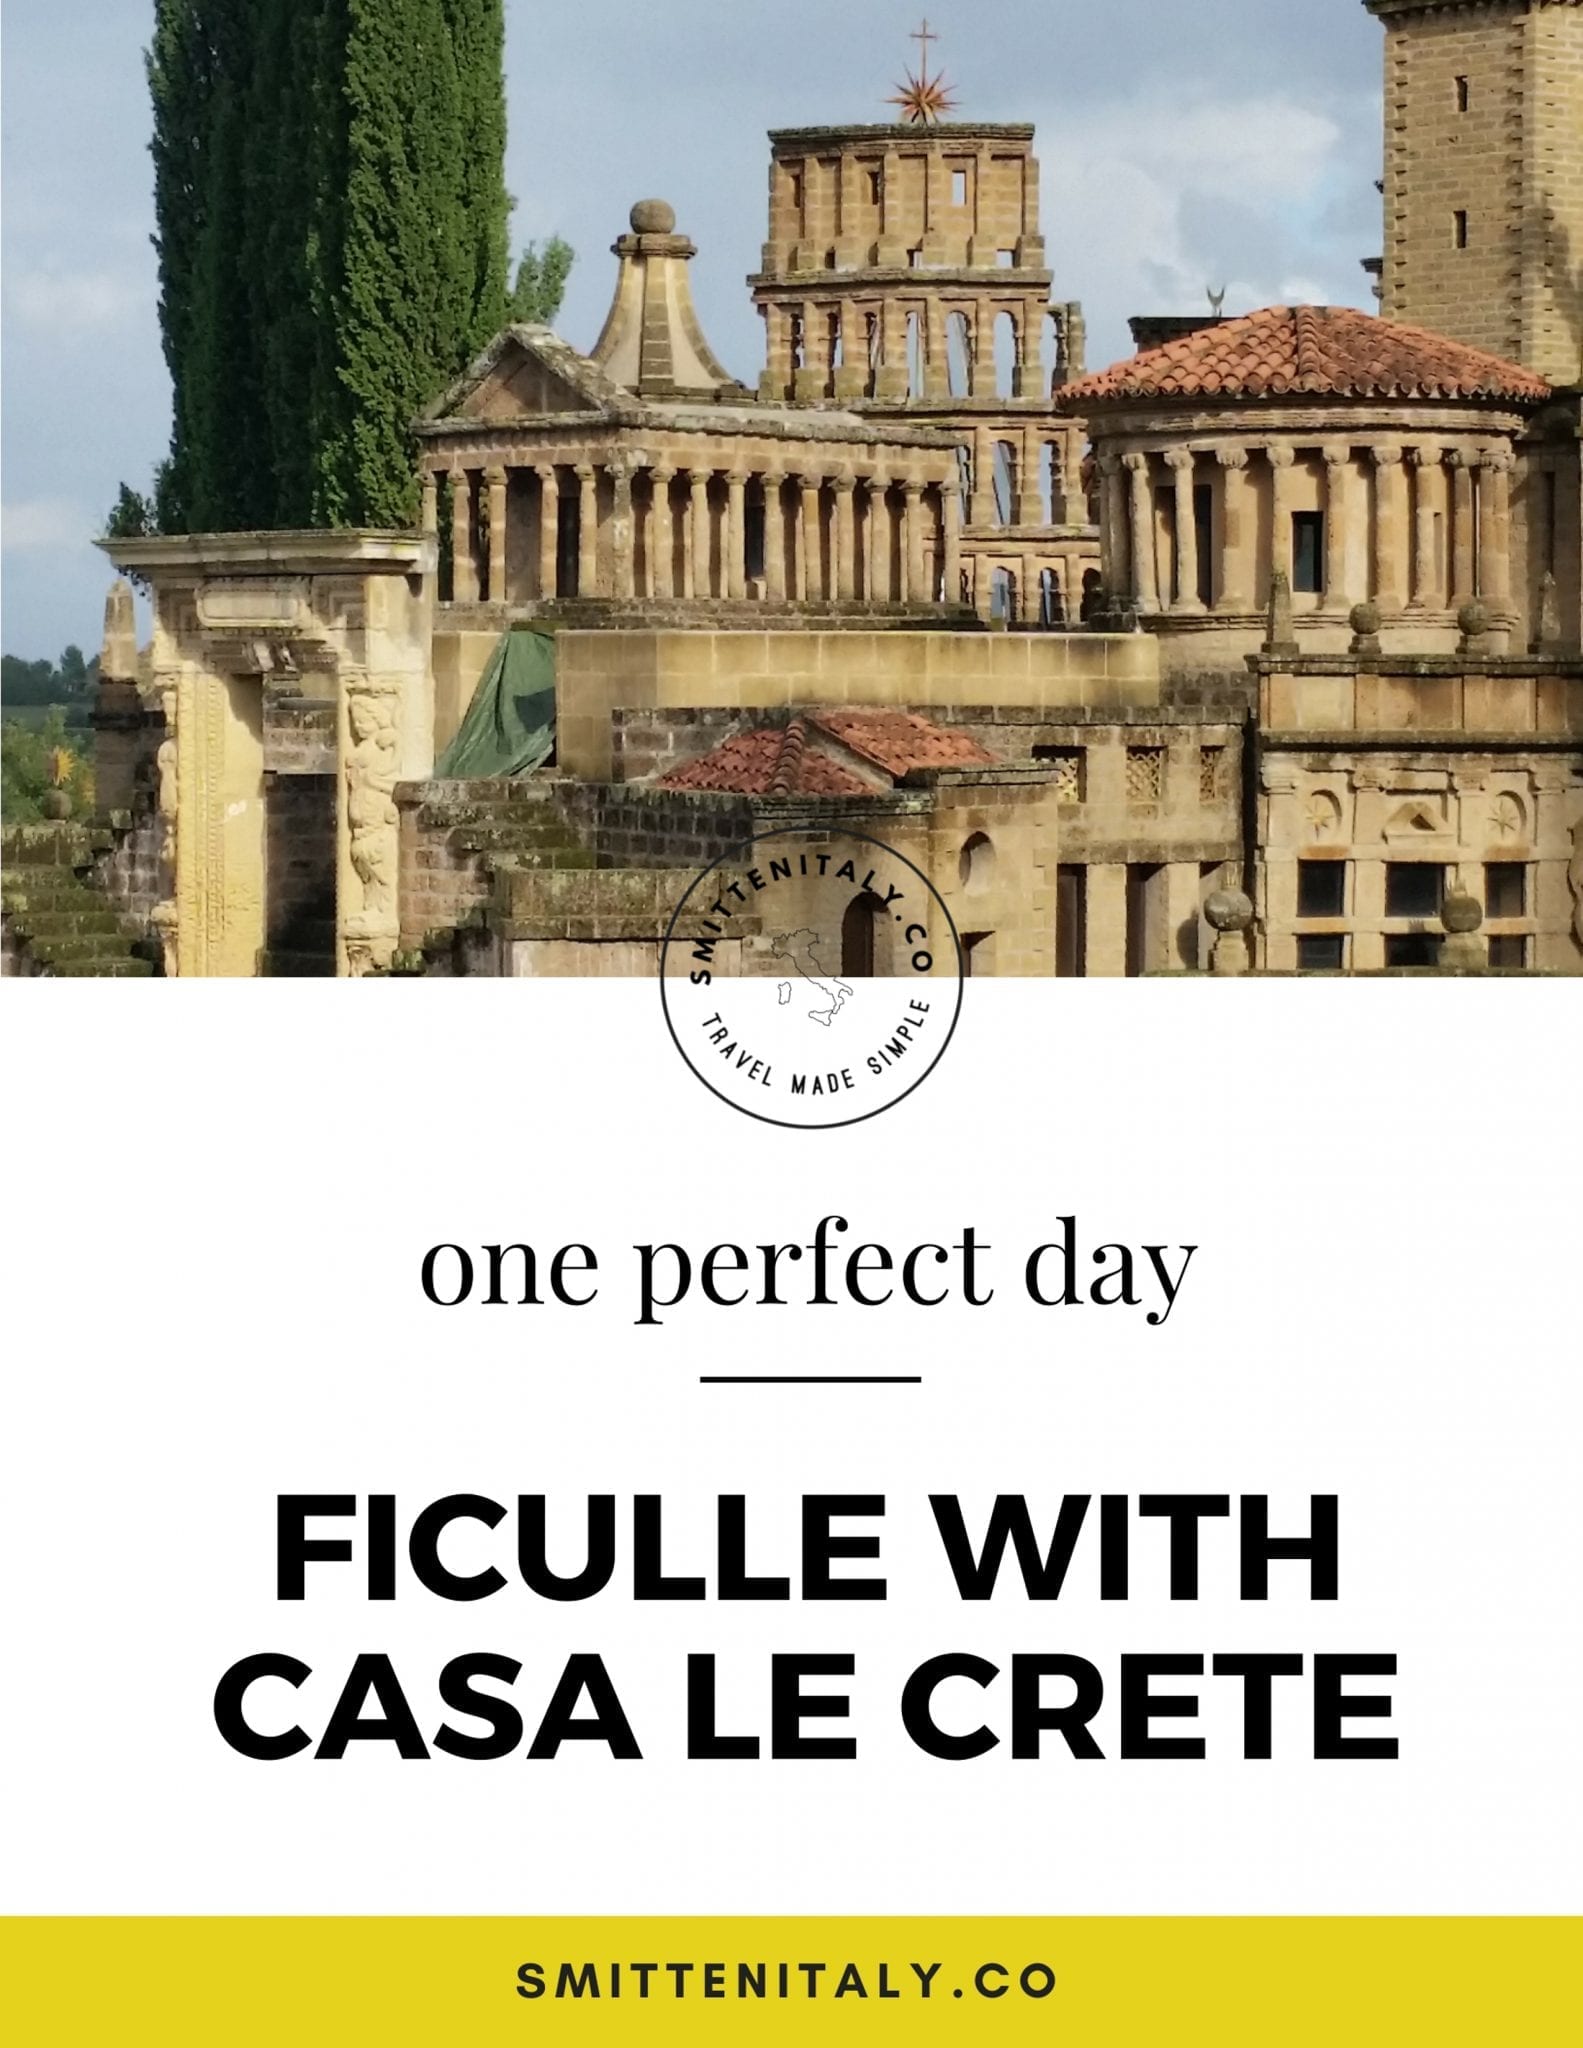 One Perfect Day: Ficulle, Umbria with Casa Le Crete